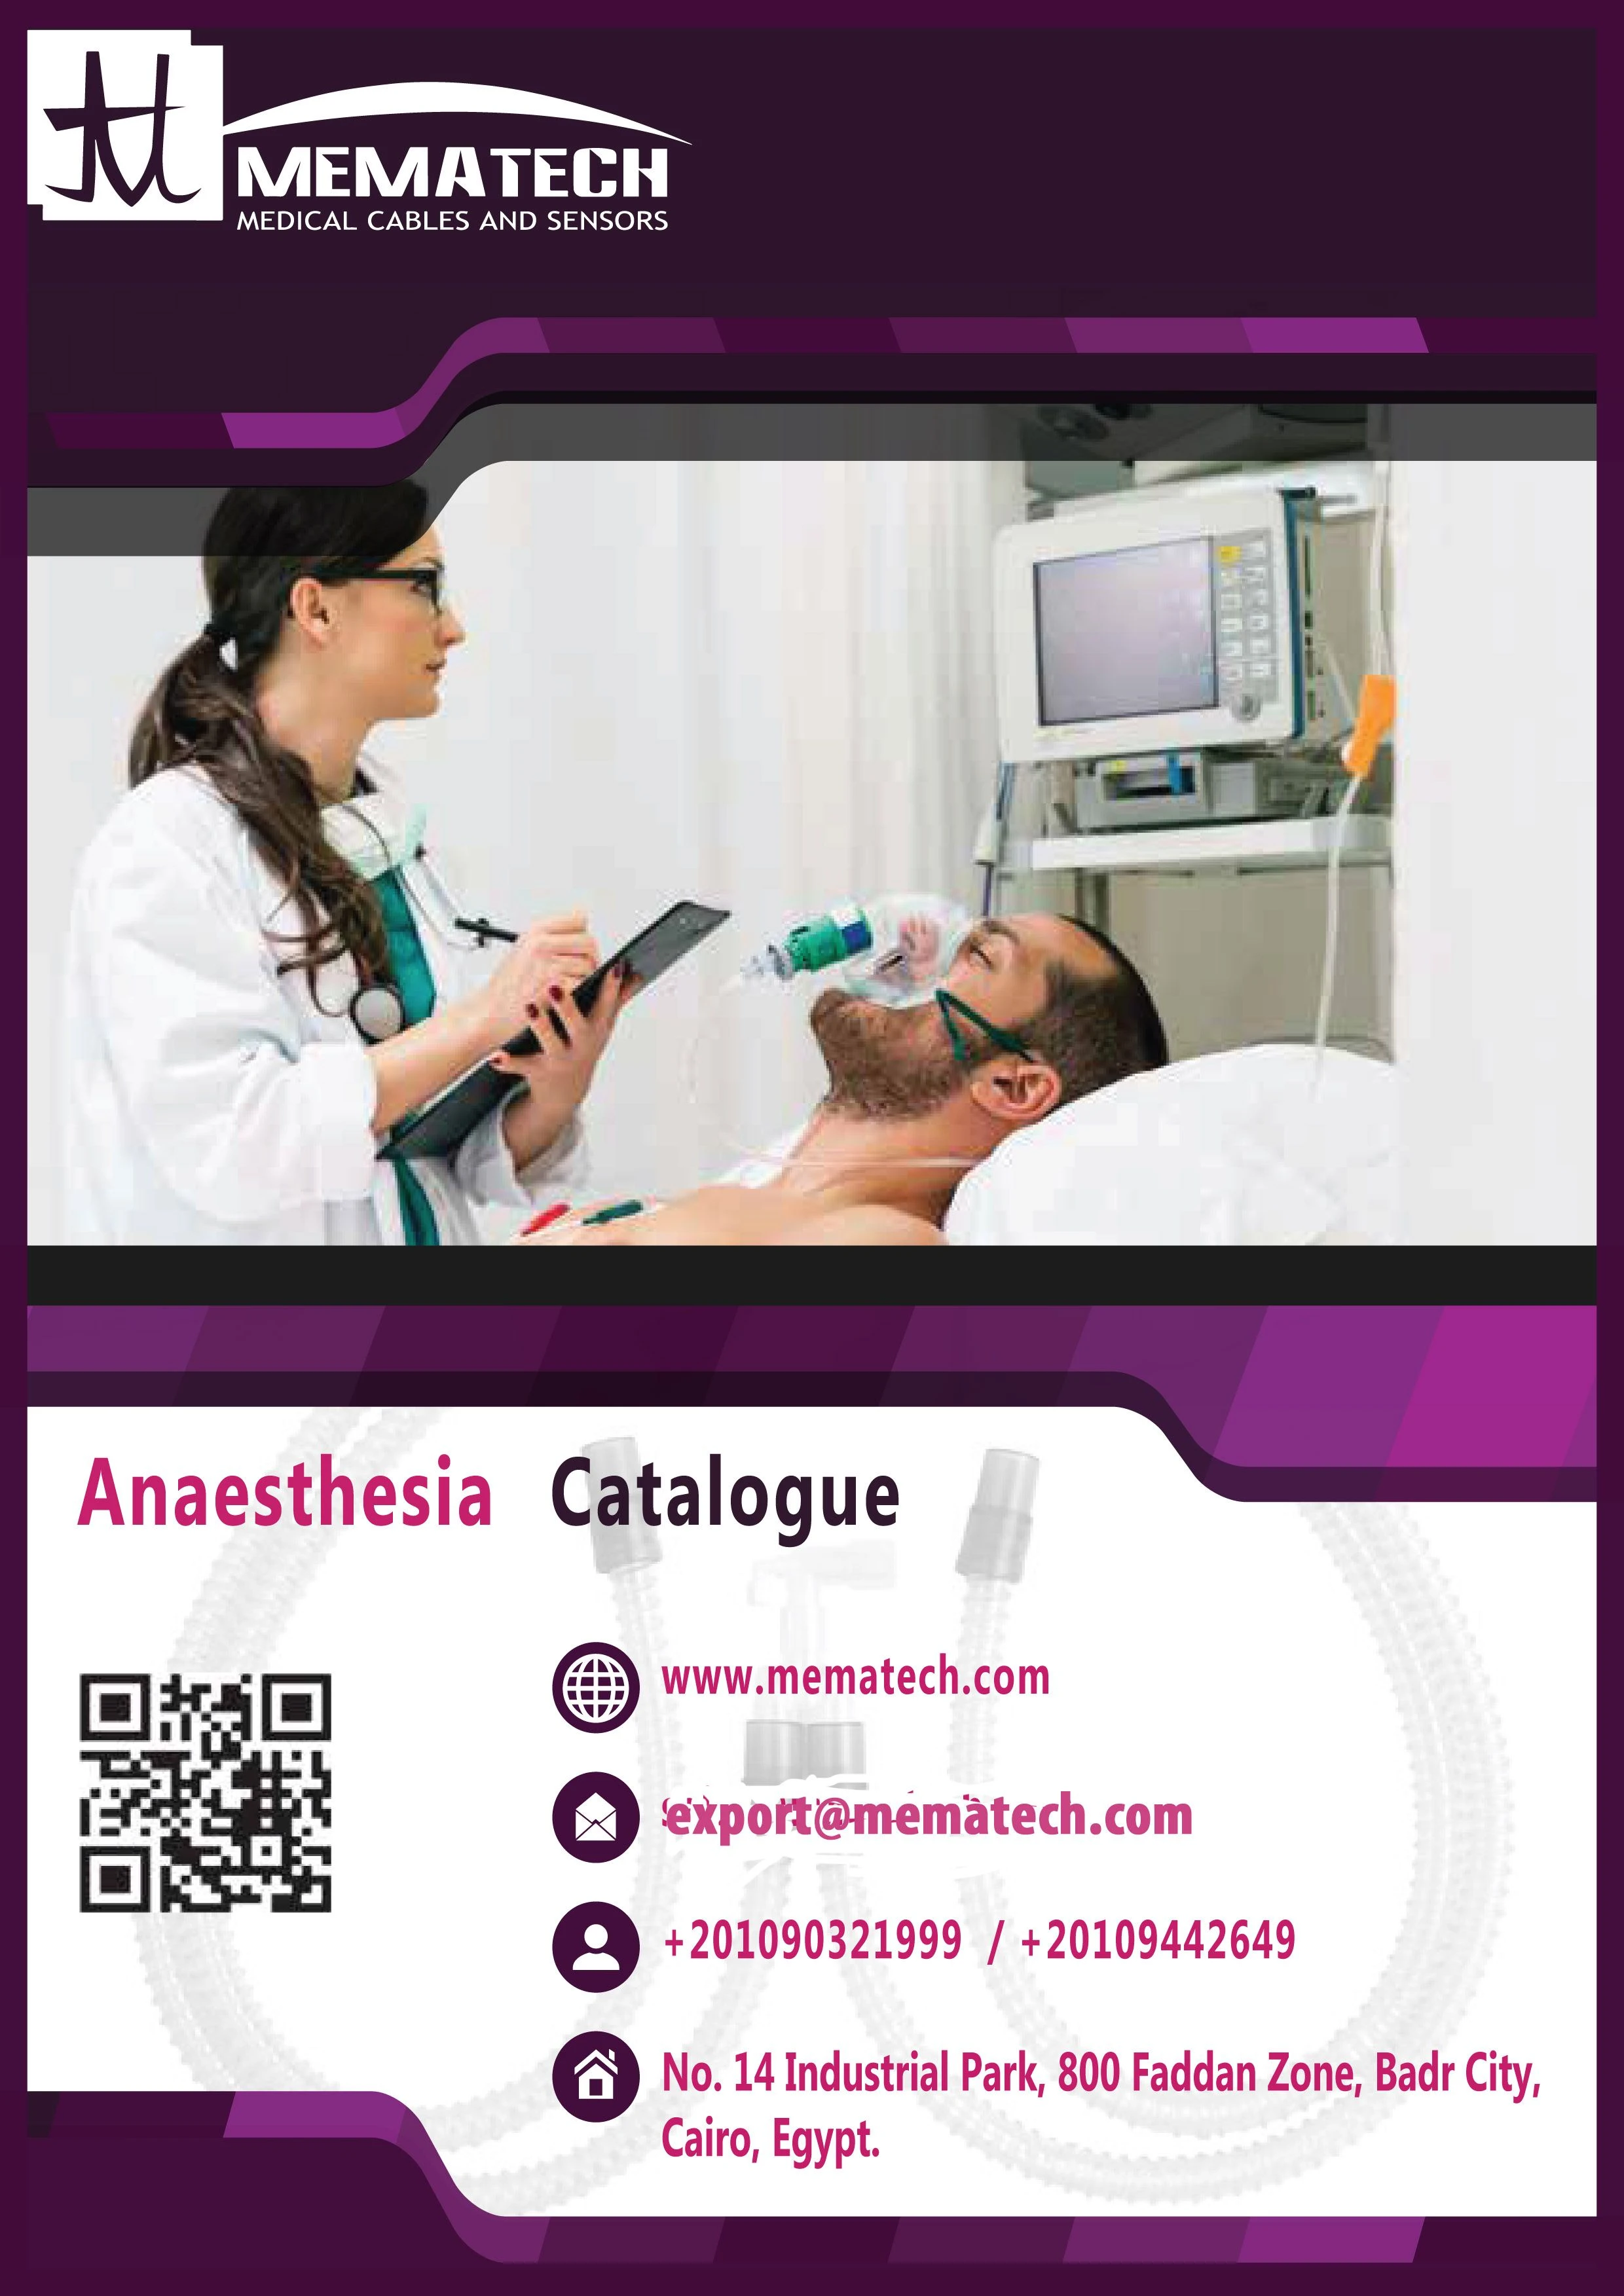 Mematech for Medical Industries